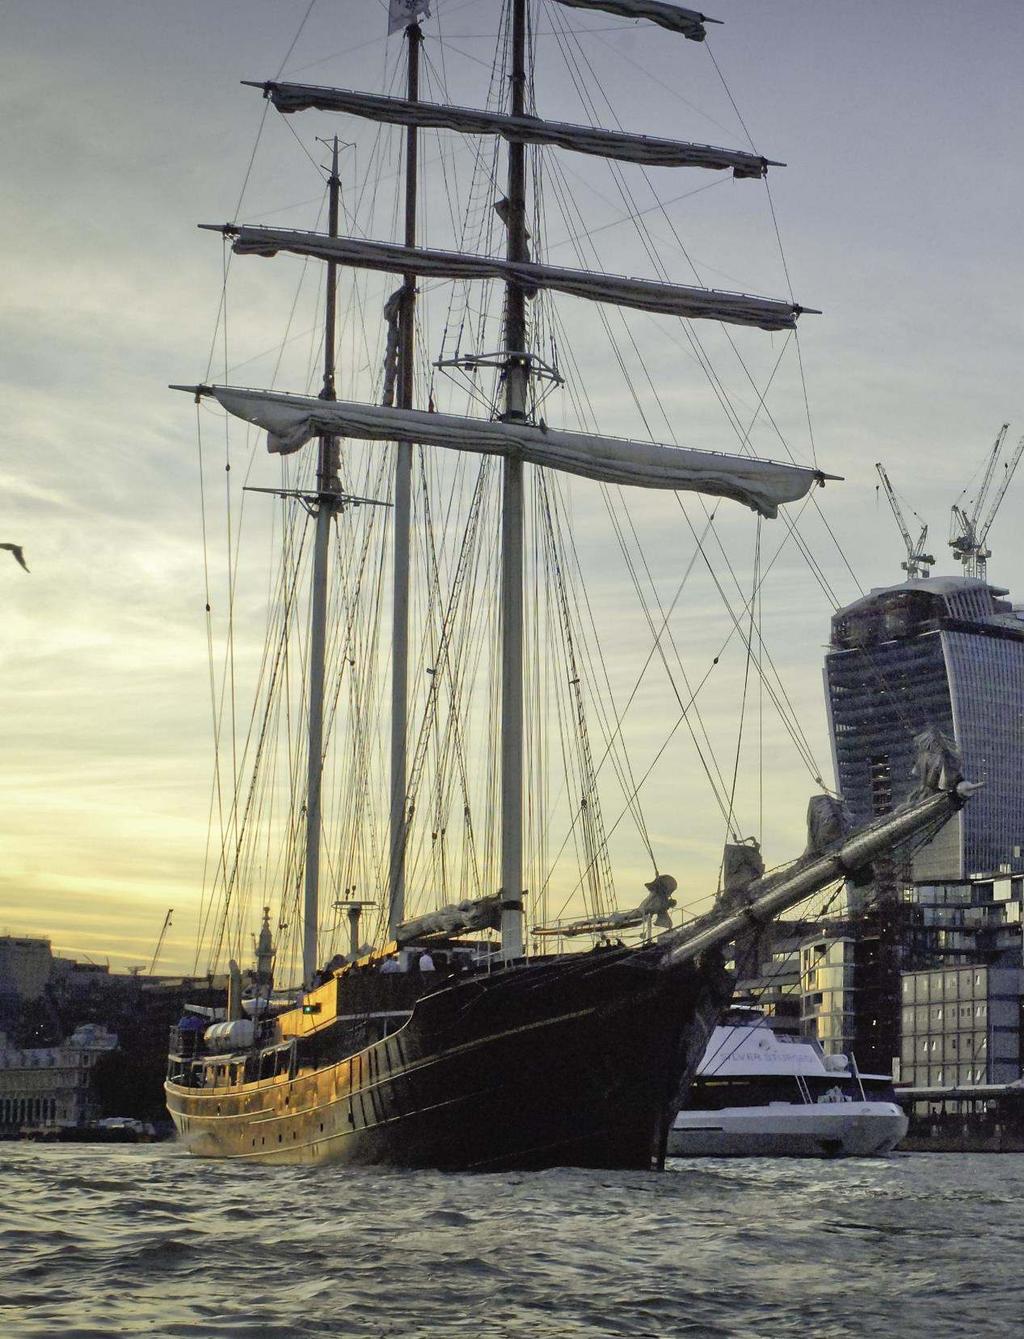 Sail Royal Greenwich Corporate Hospitality: Personal reception area in the Old Royal Naval College or at the Royal Arsenal Riverside Exclusive use of your very own Tall Ship Complete package,